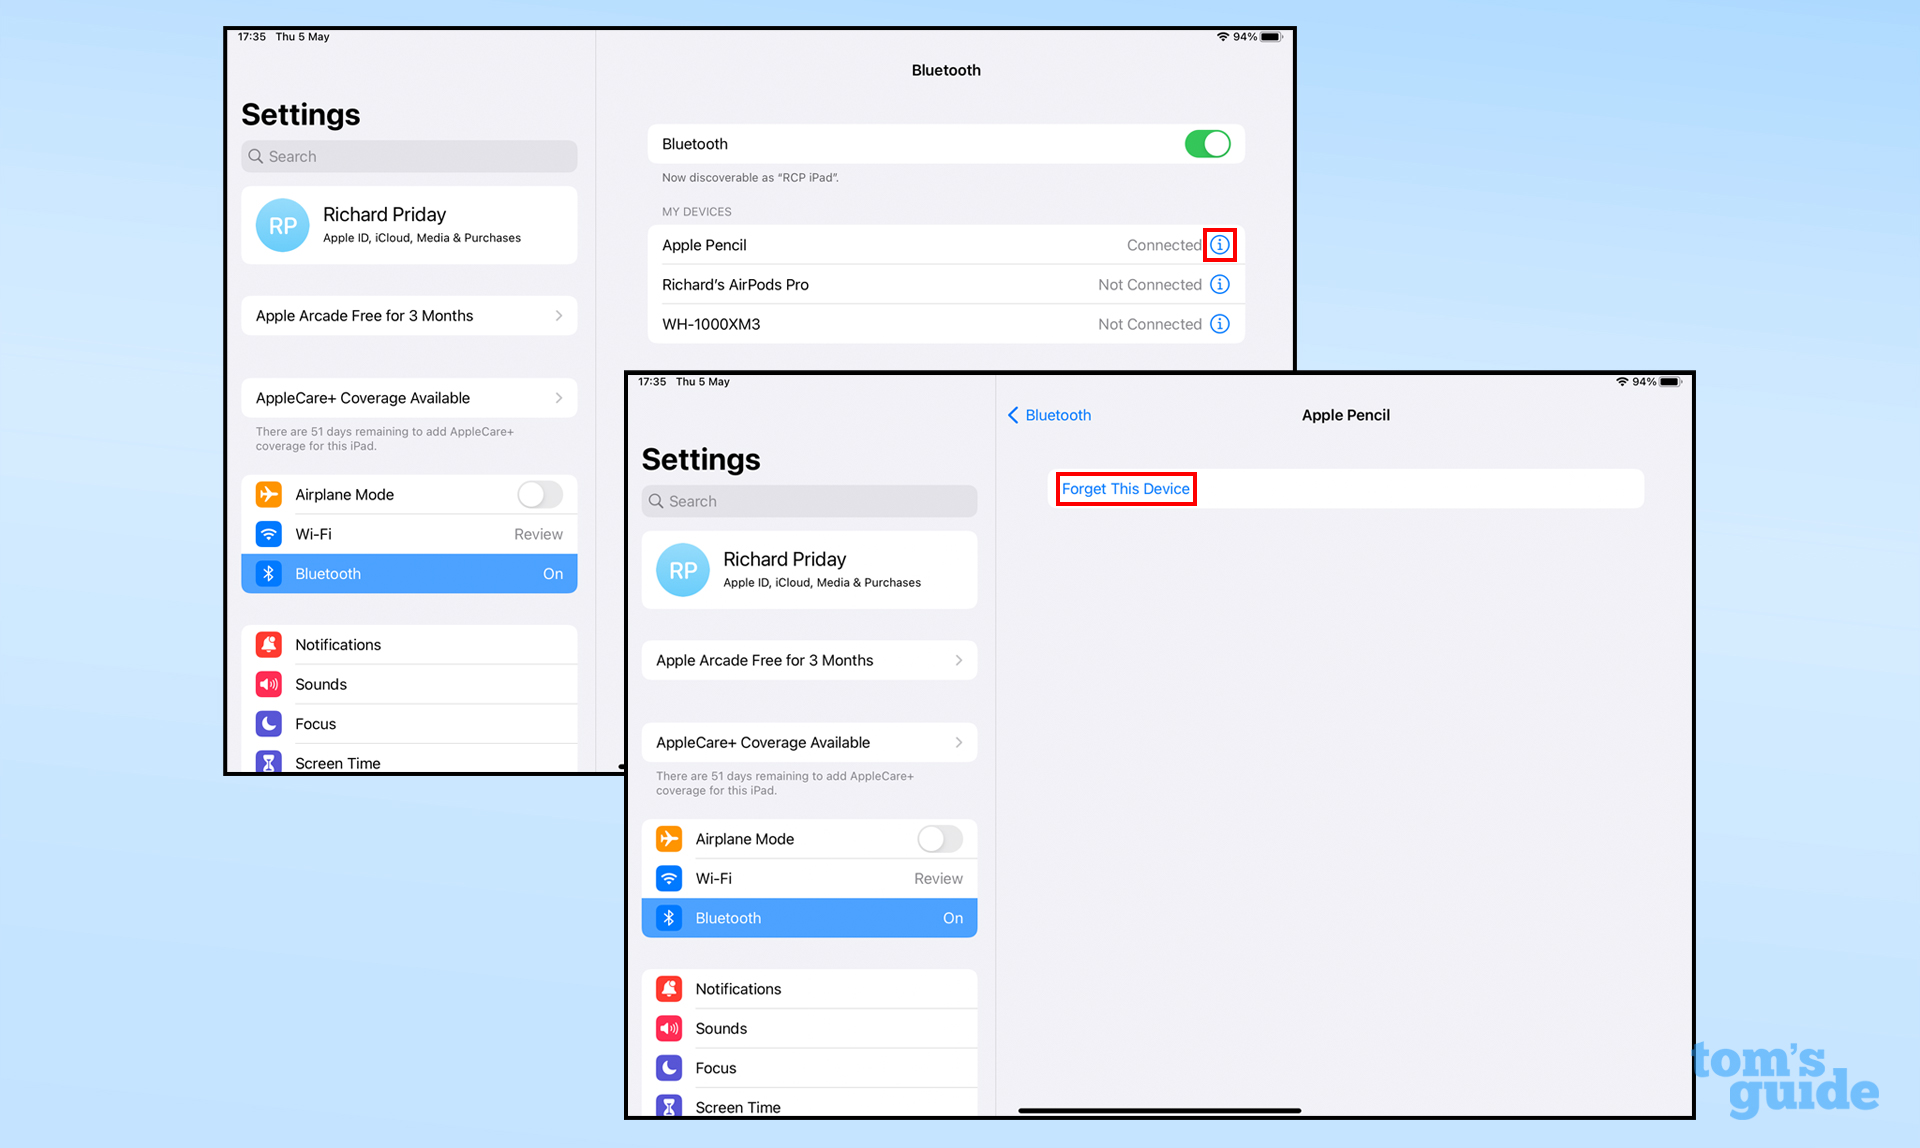 iPadOS Bluetooth Settings app shows how to forget to connect with Apple Pencil